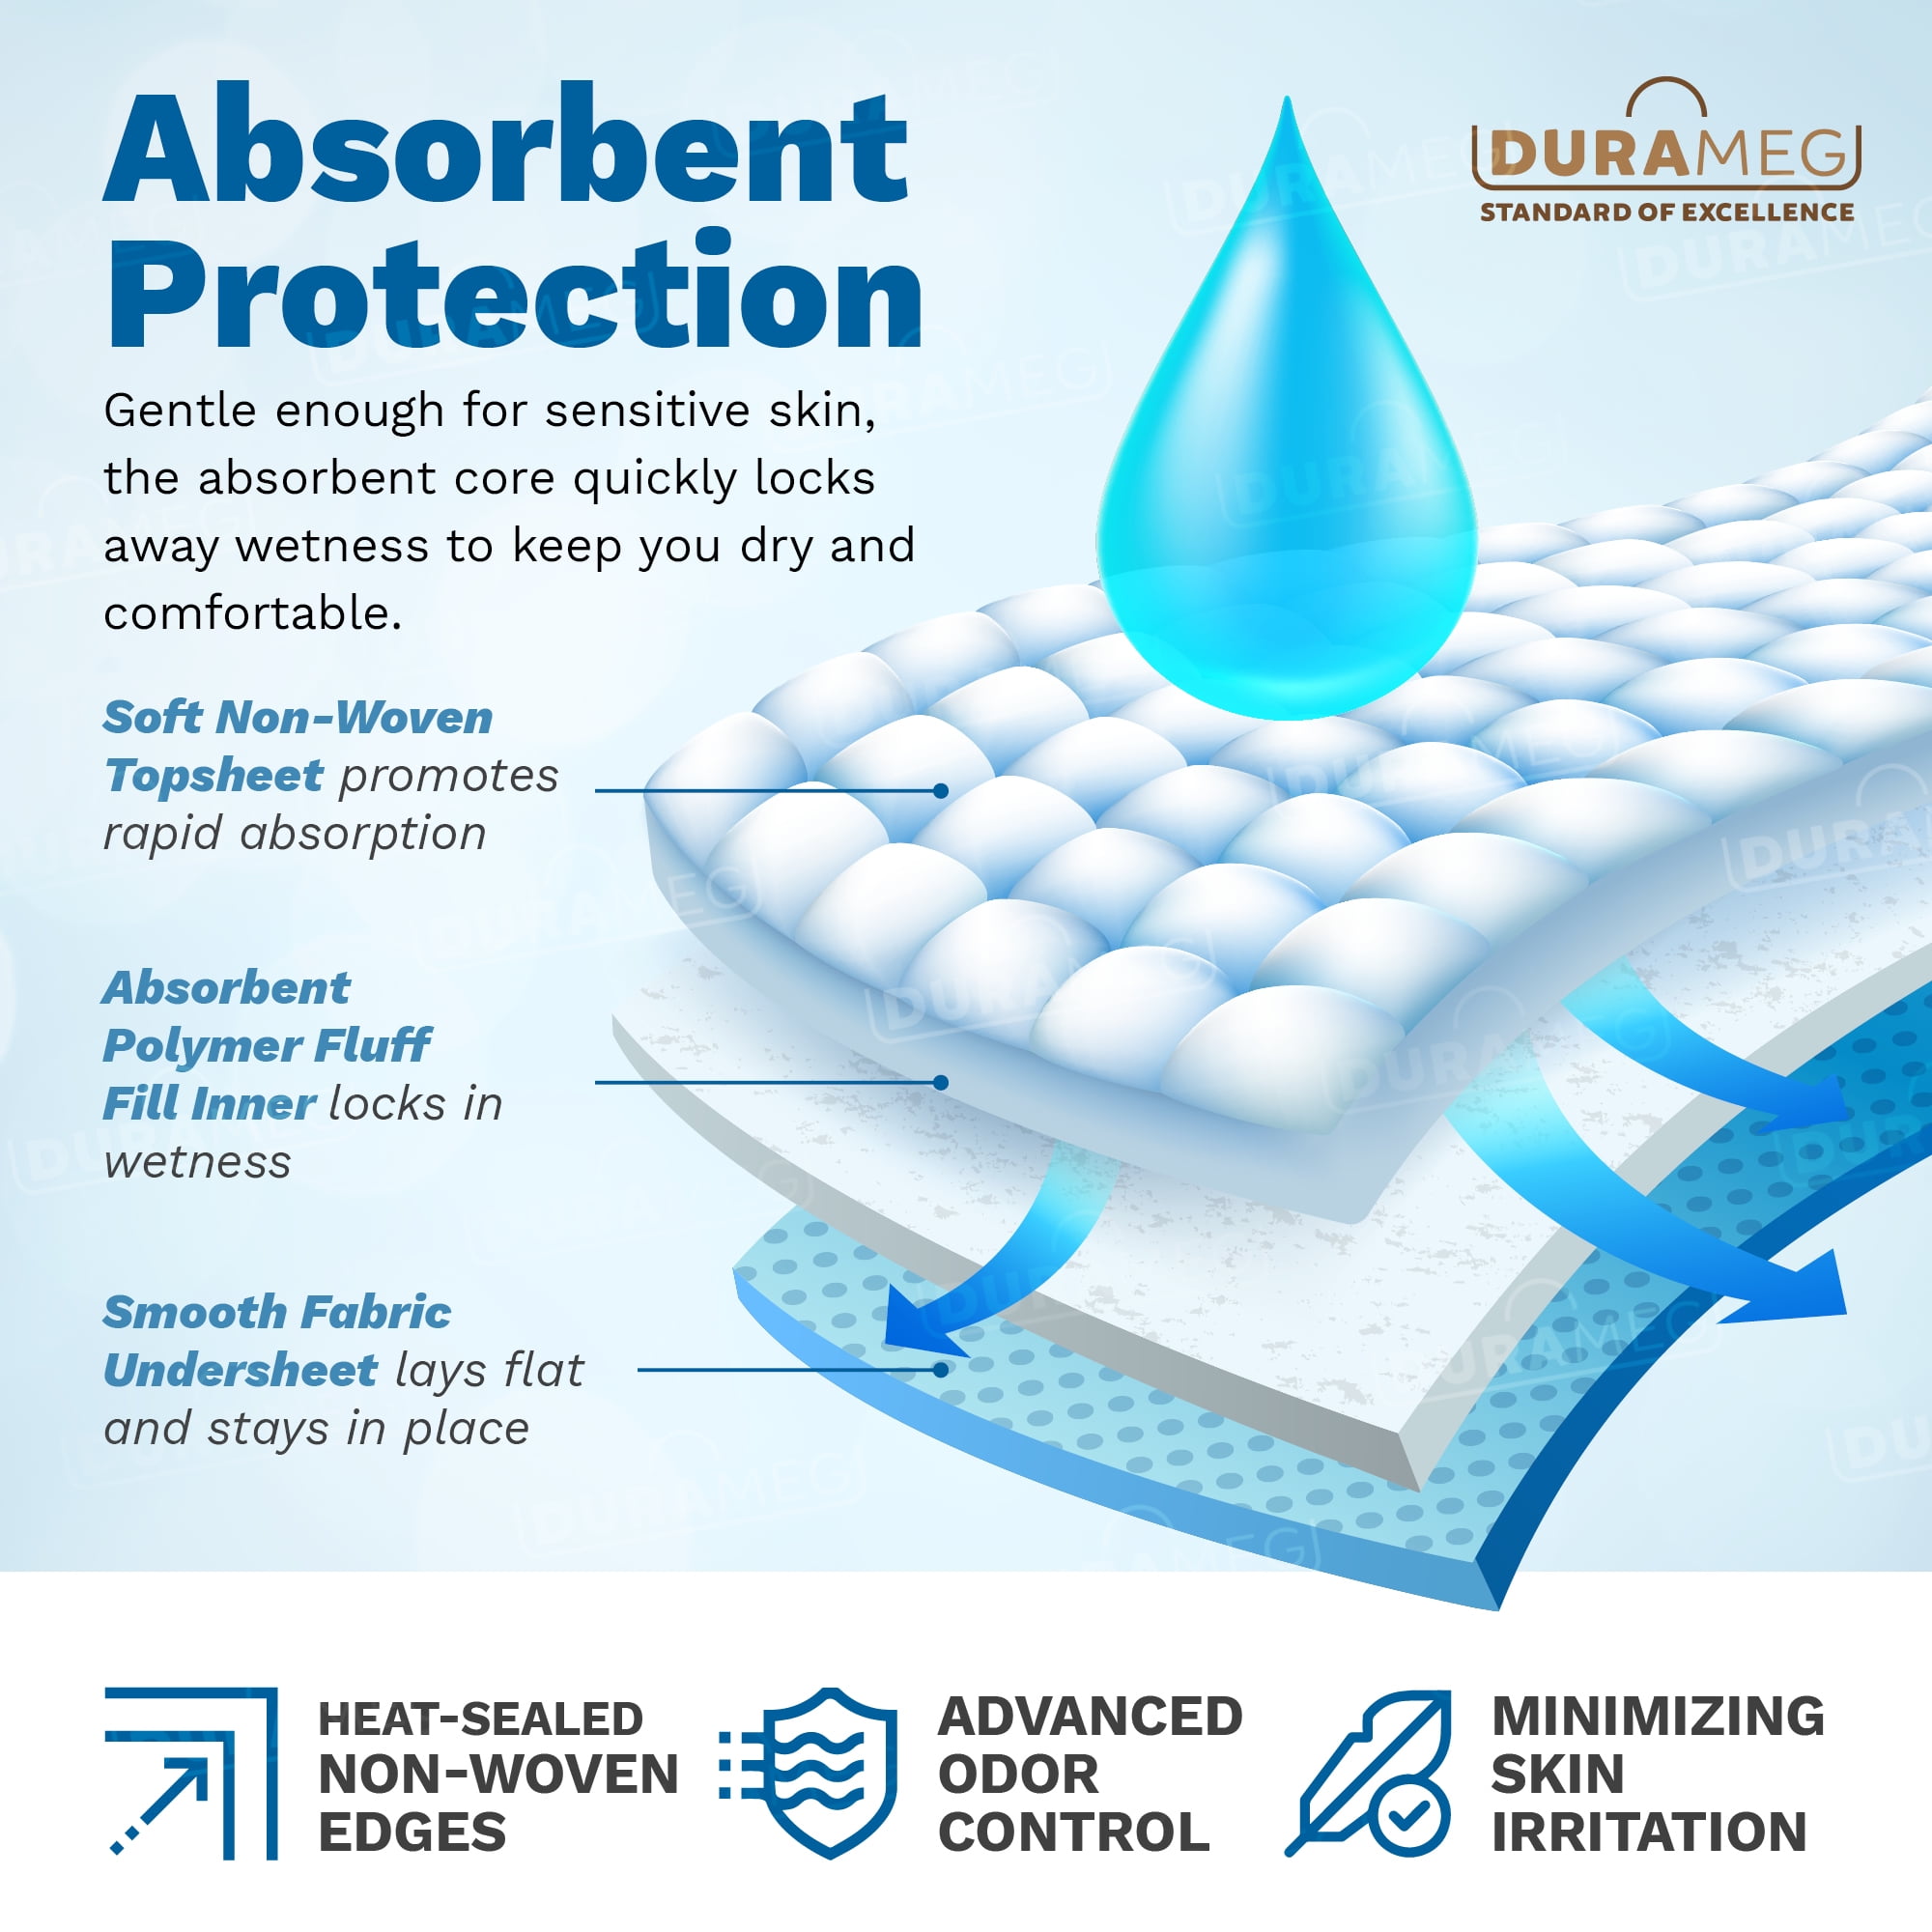 Tolobeve 23'' X 36'' Underpads Incontinence Bed Pads Disposable 60 Count  Chucks Pads, Pee Pads for Adults Baby Elderly, Chux Pads, Super Absorbent  Protection, Also as Puppy Pee Pad - Coupon Codes